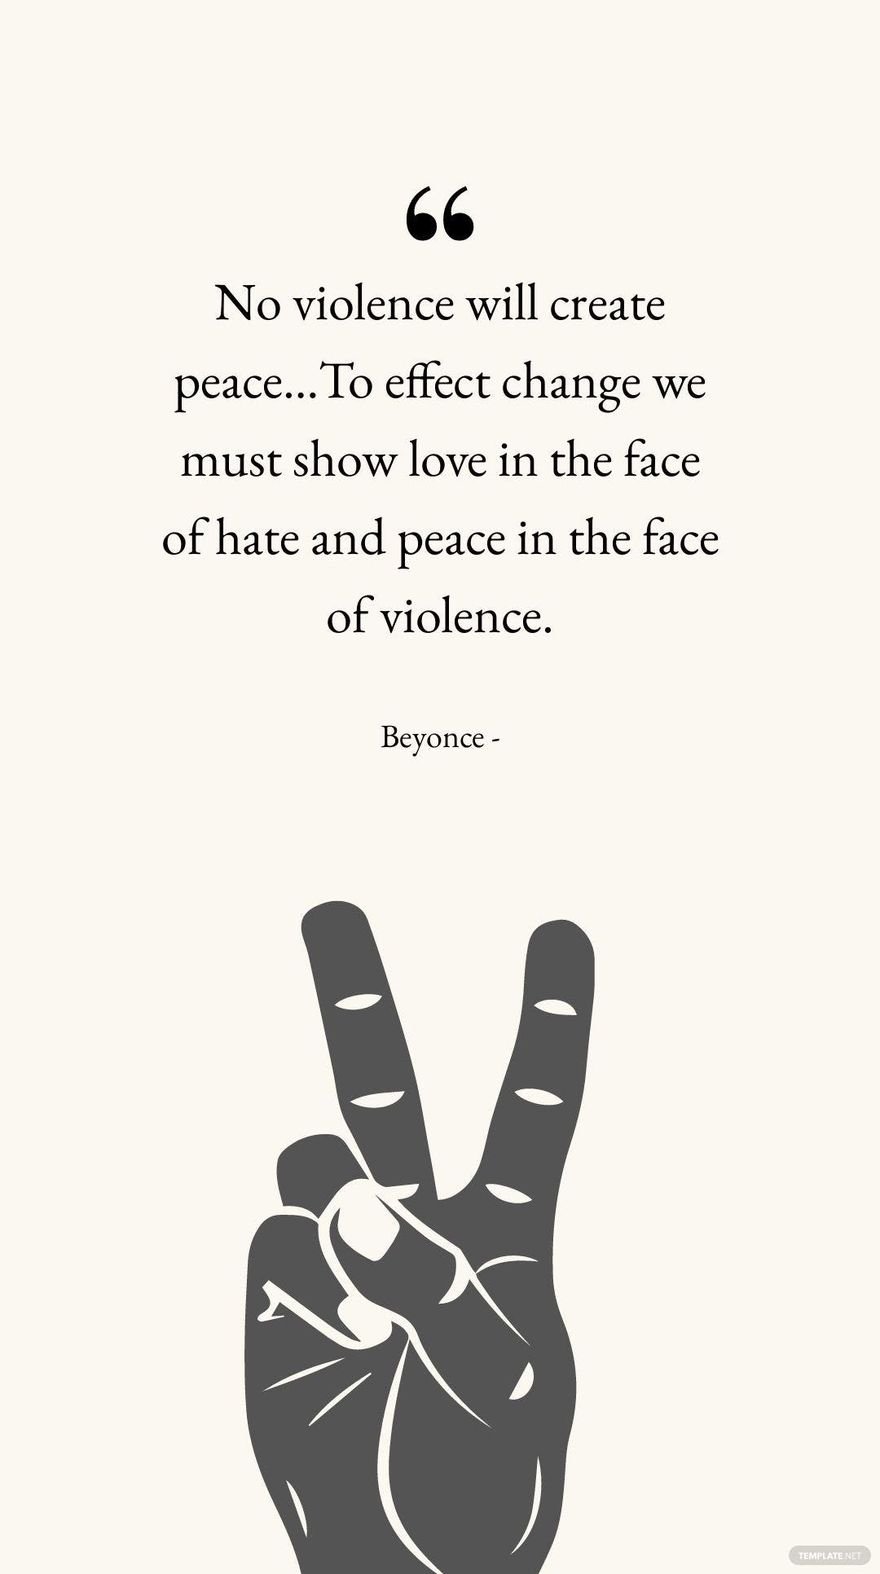 Beyonce - No violence will create peace…To effect change we must show love in the face of hate and peace in the face of violence.